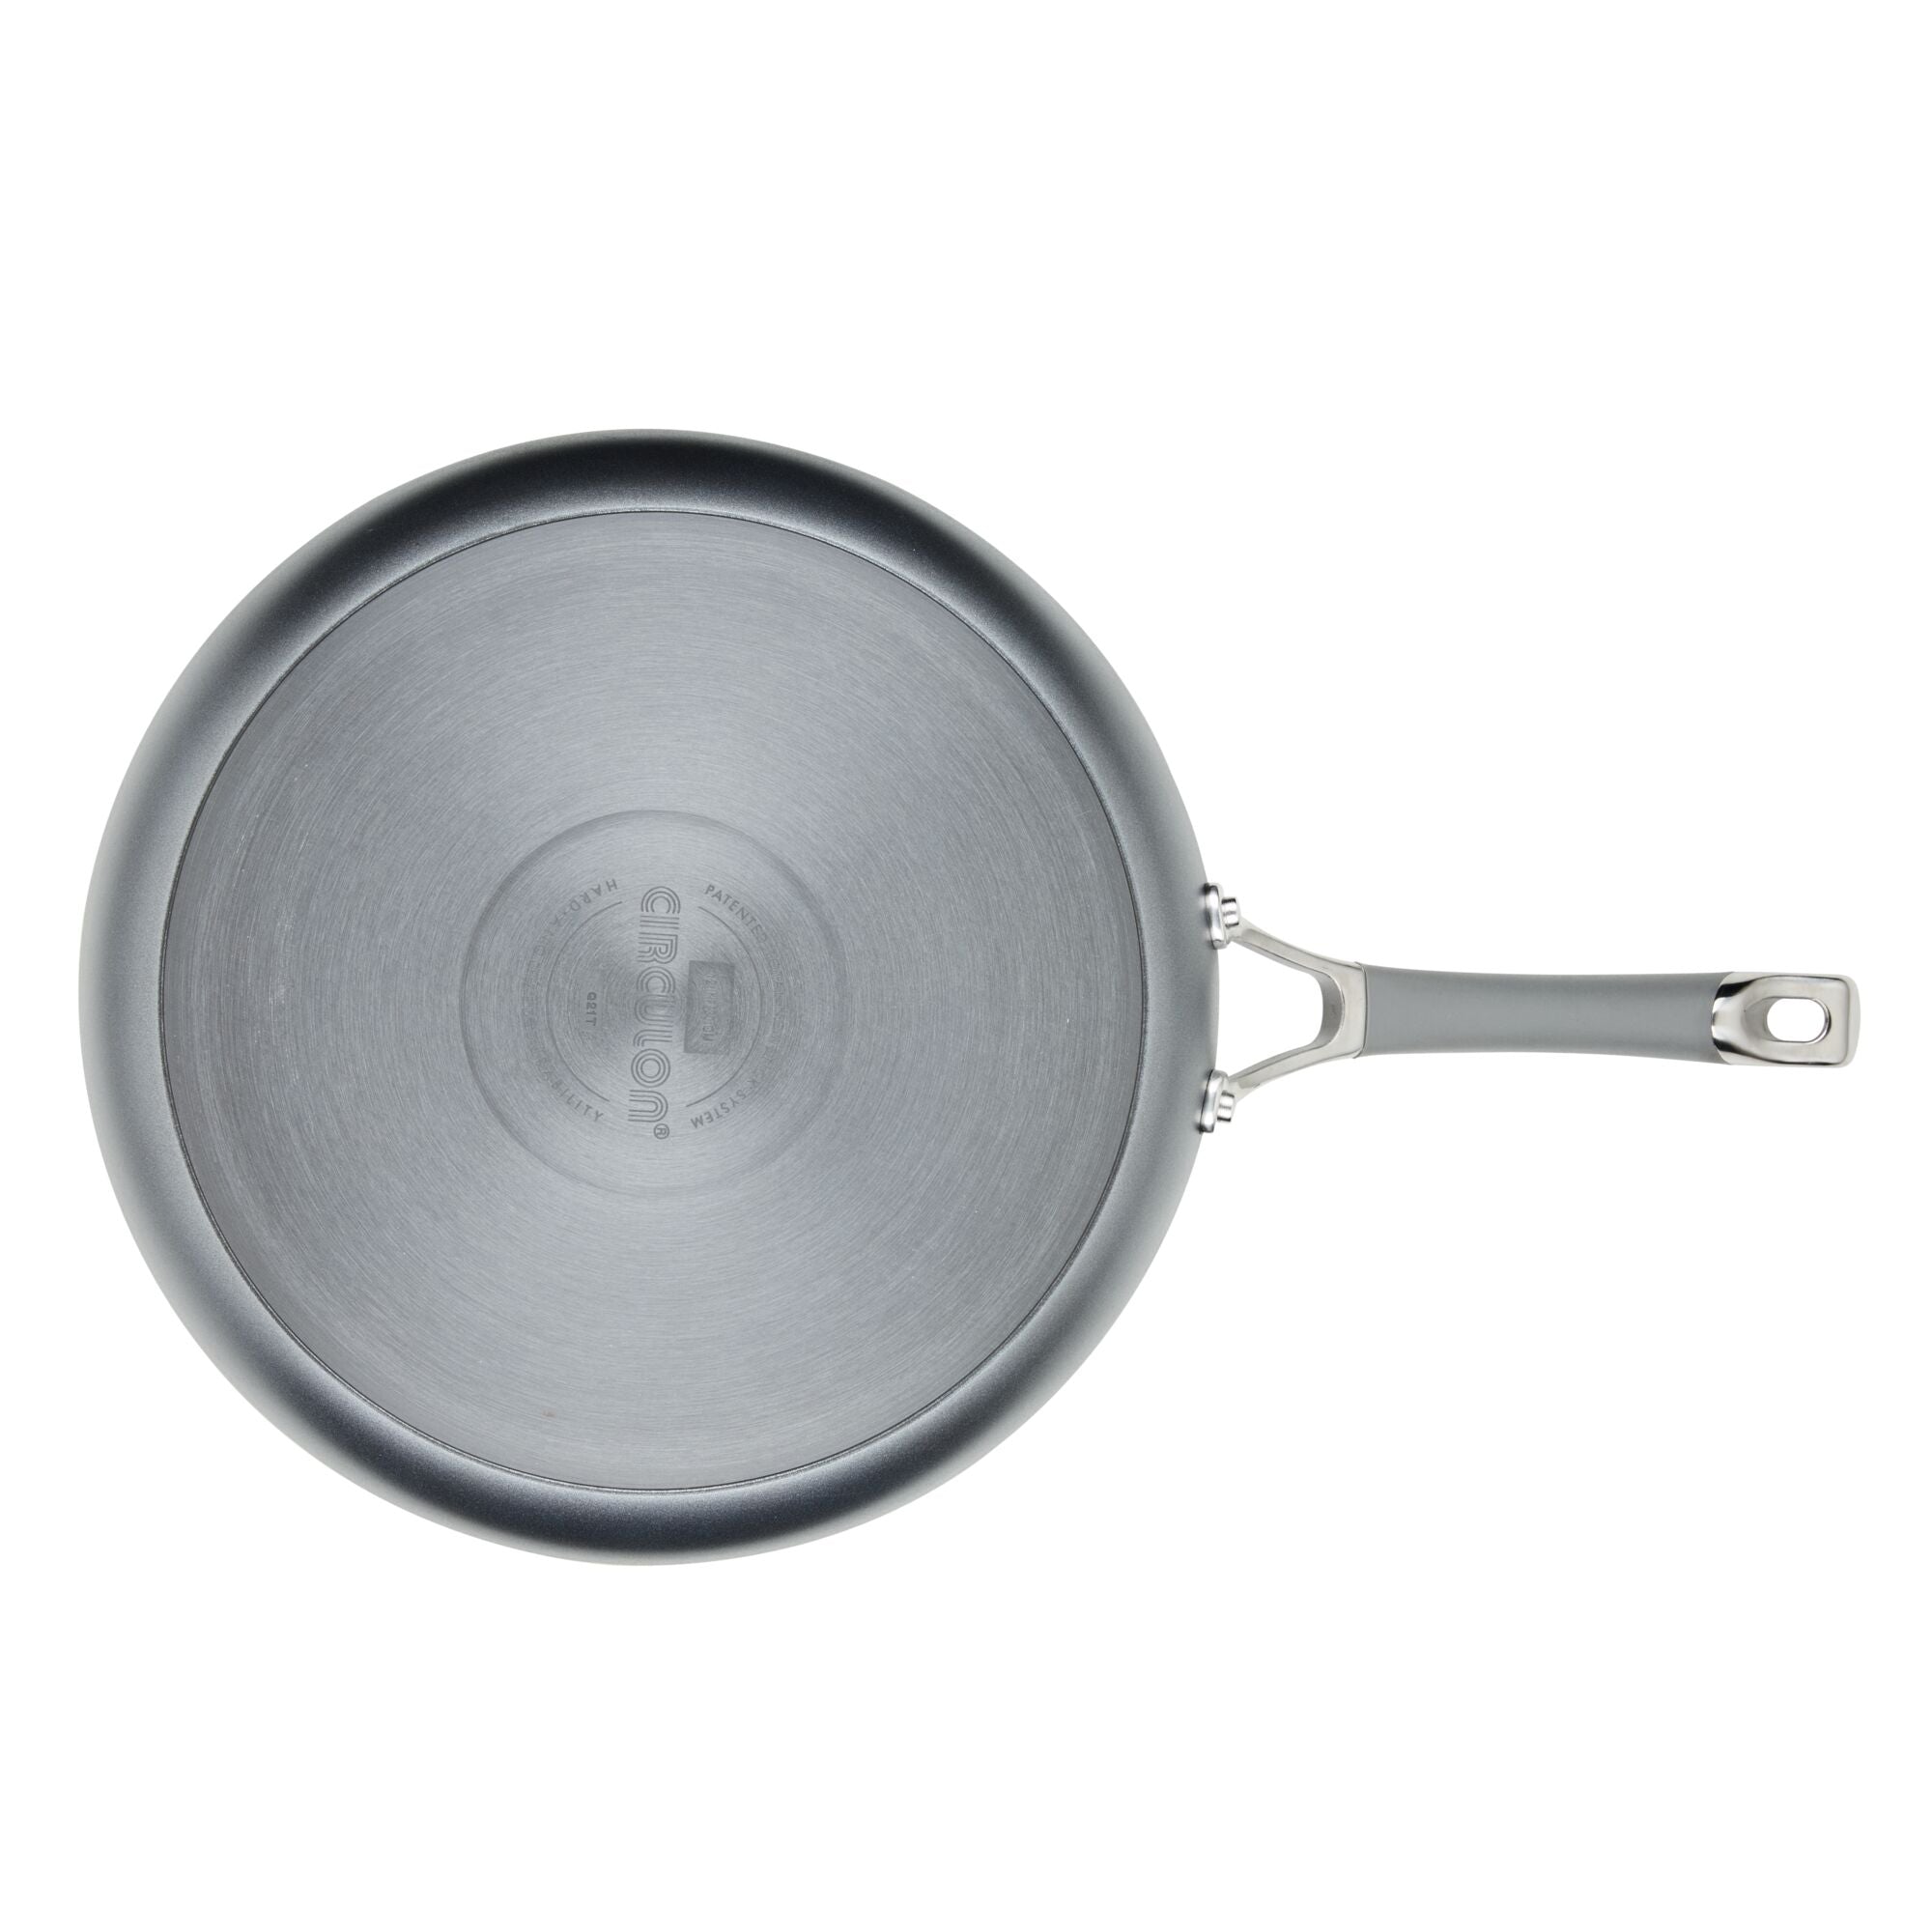 Circulon Radiance Hard Anodized Nonstick Deep Frying Pan with Lid, 12-Inch,  Gray